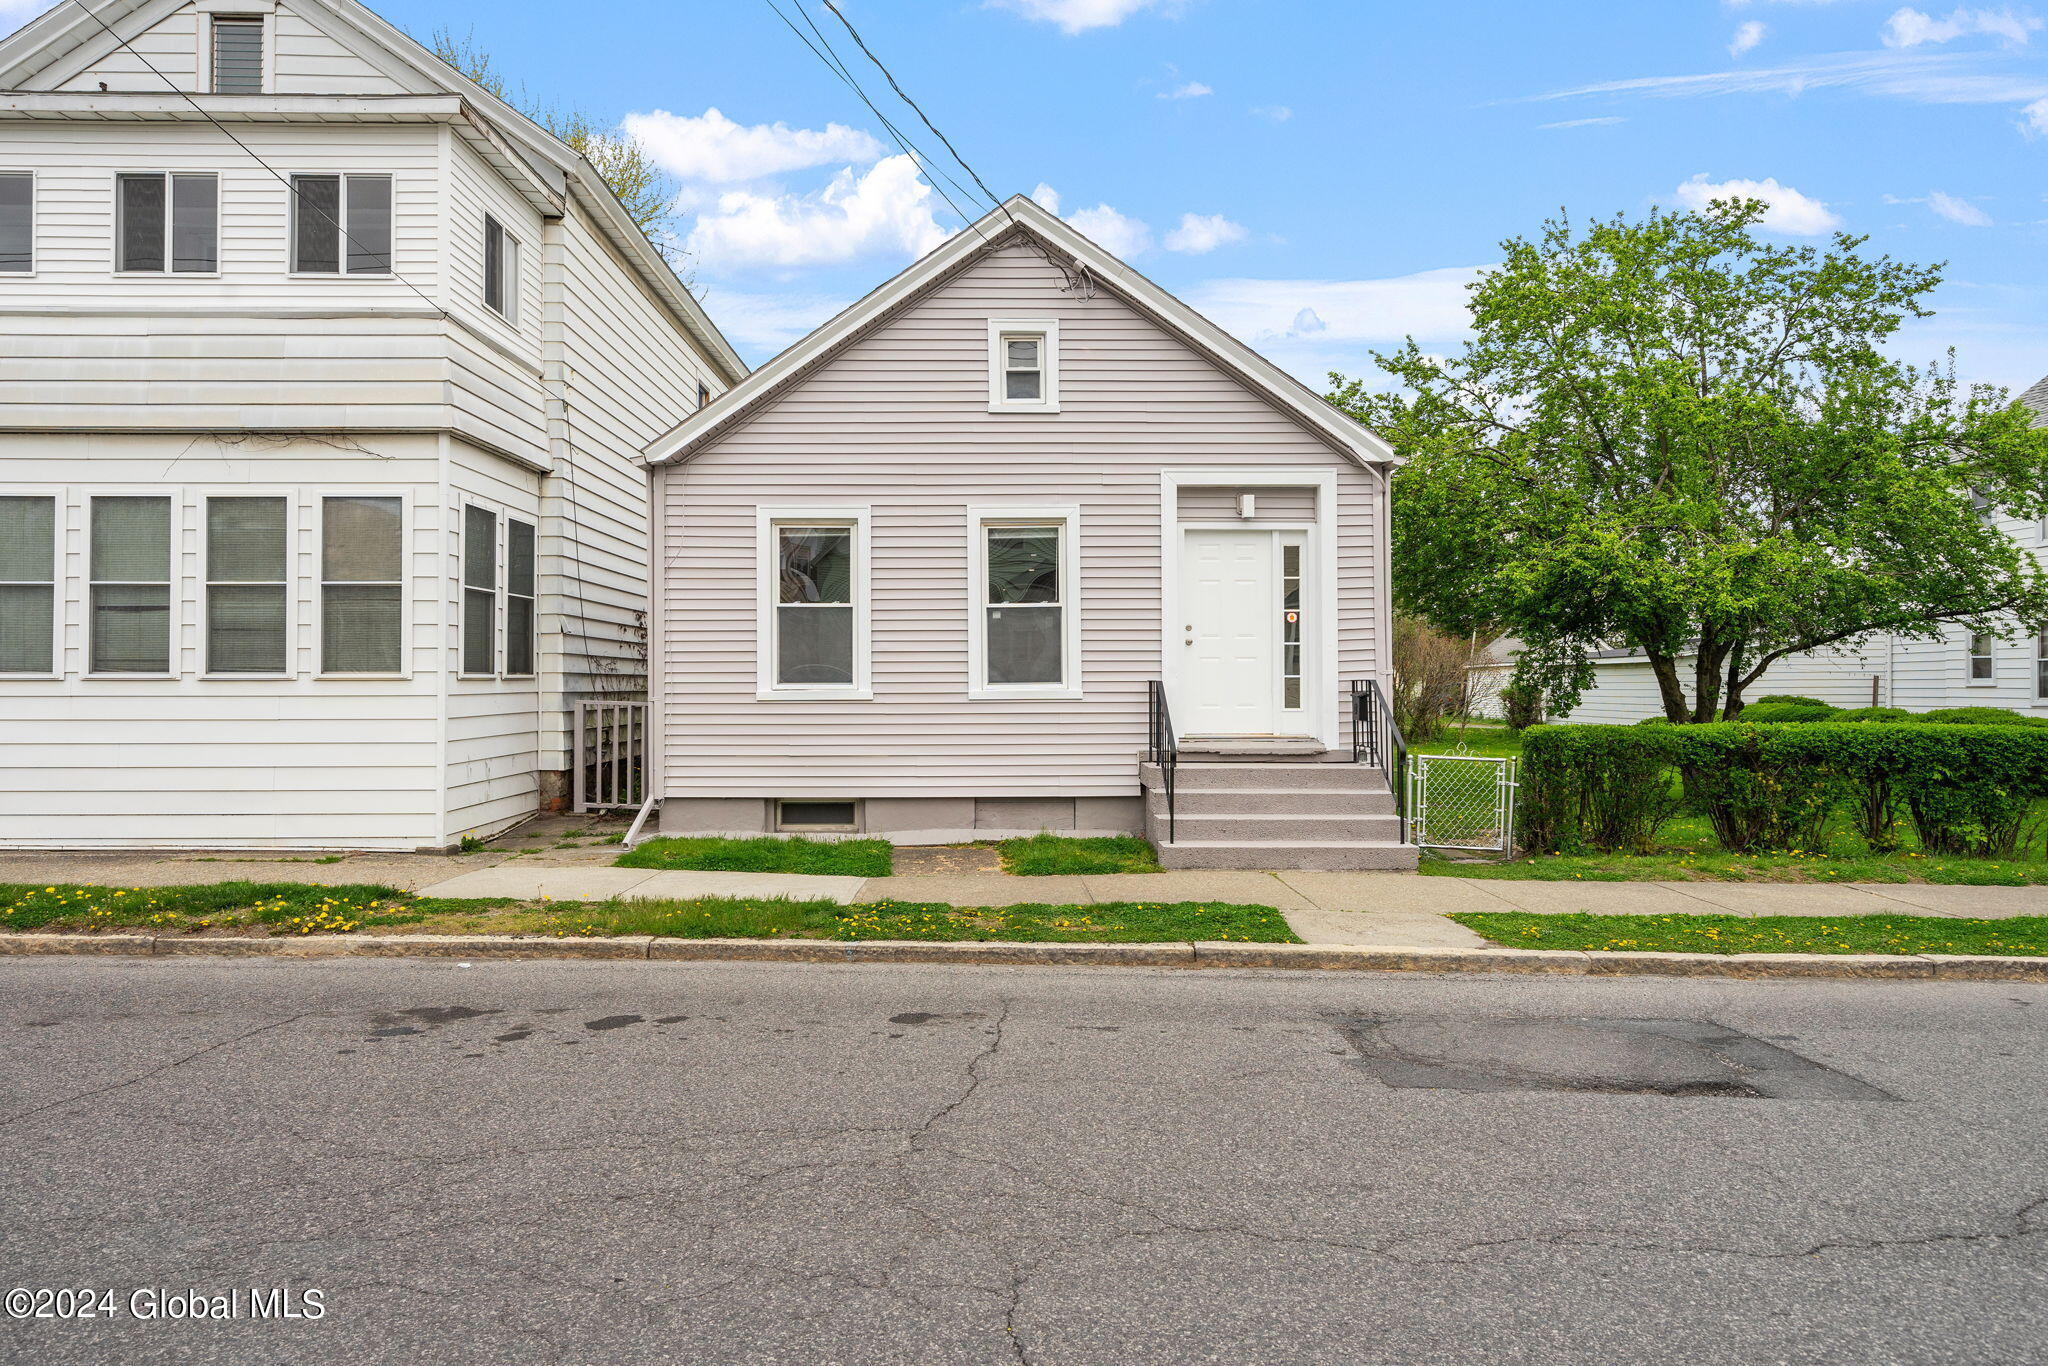 1-web-or-mls-715-25th-st